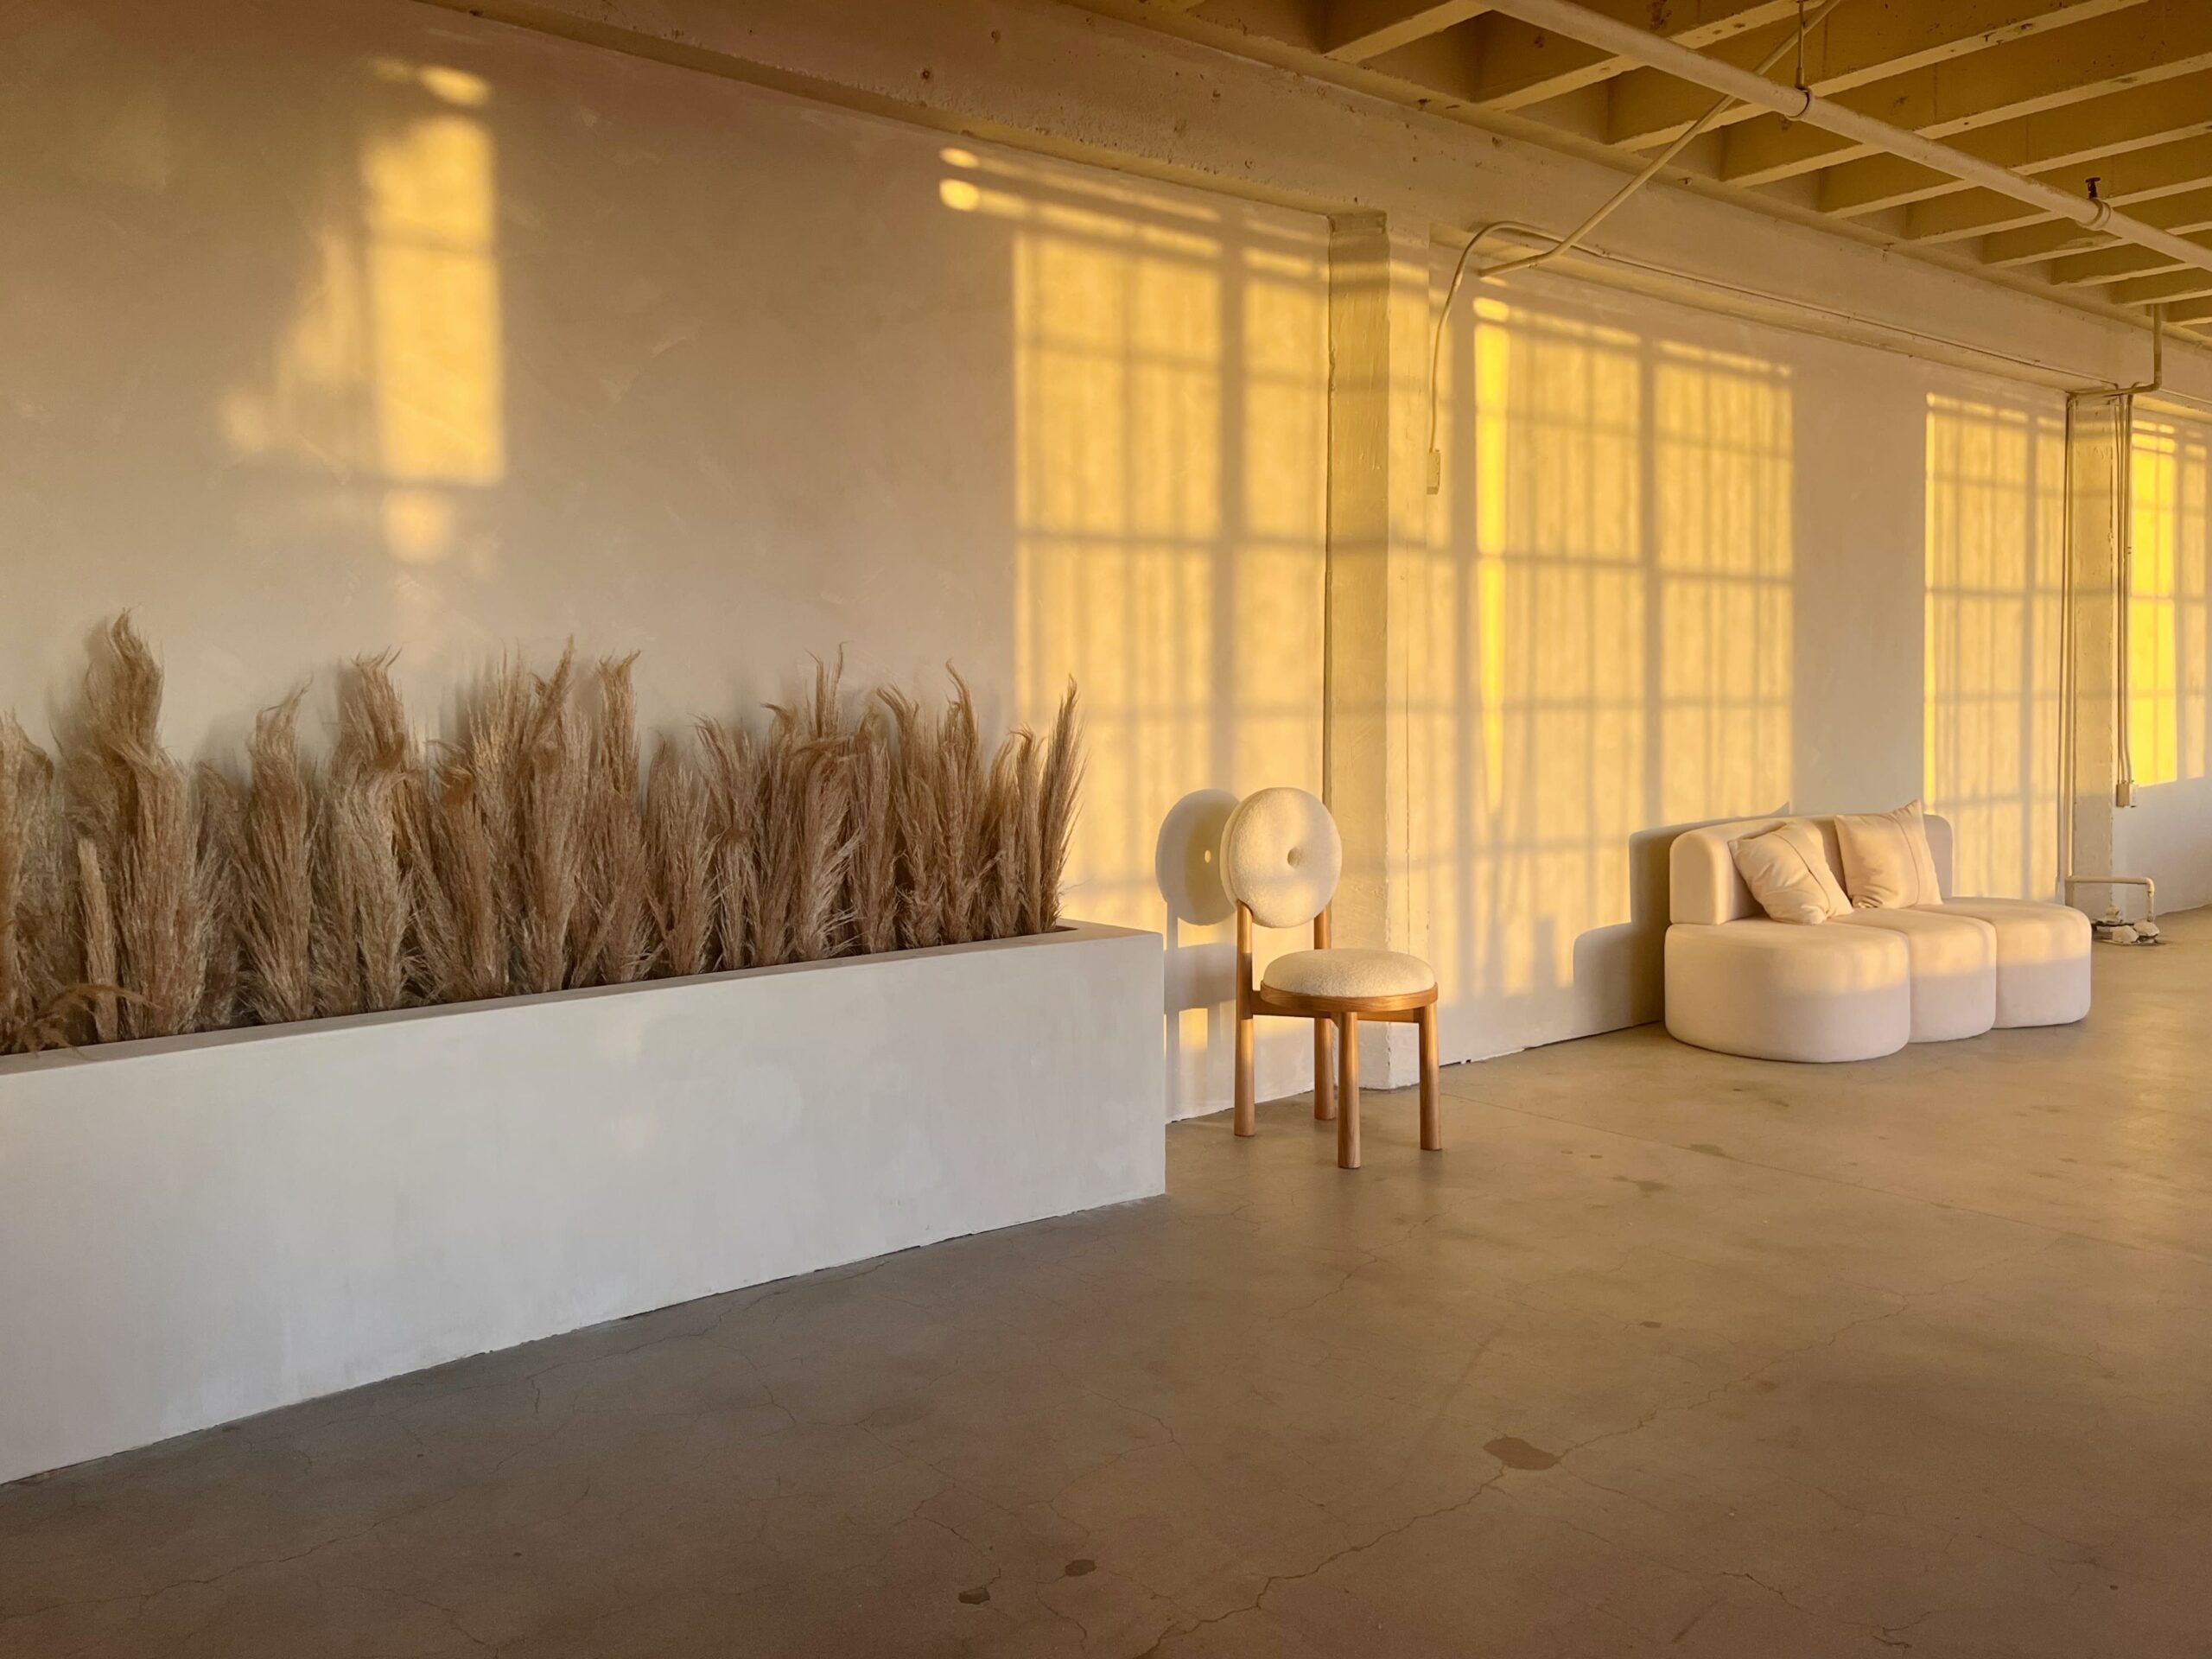 Los Angeles loft space during golden hour